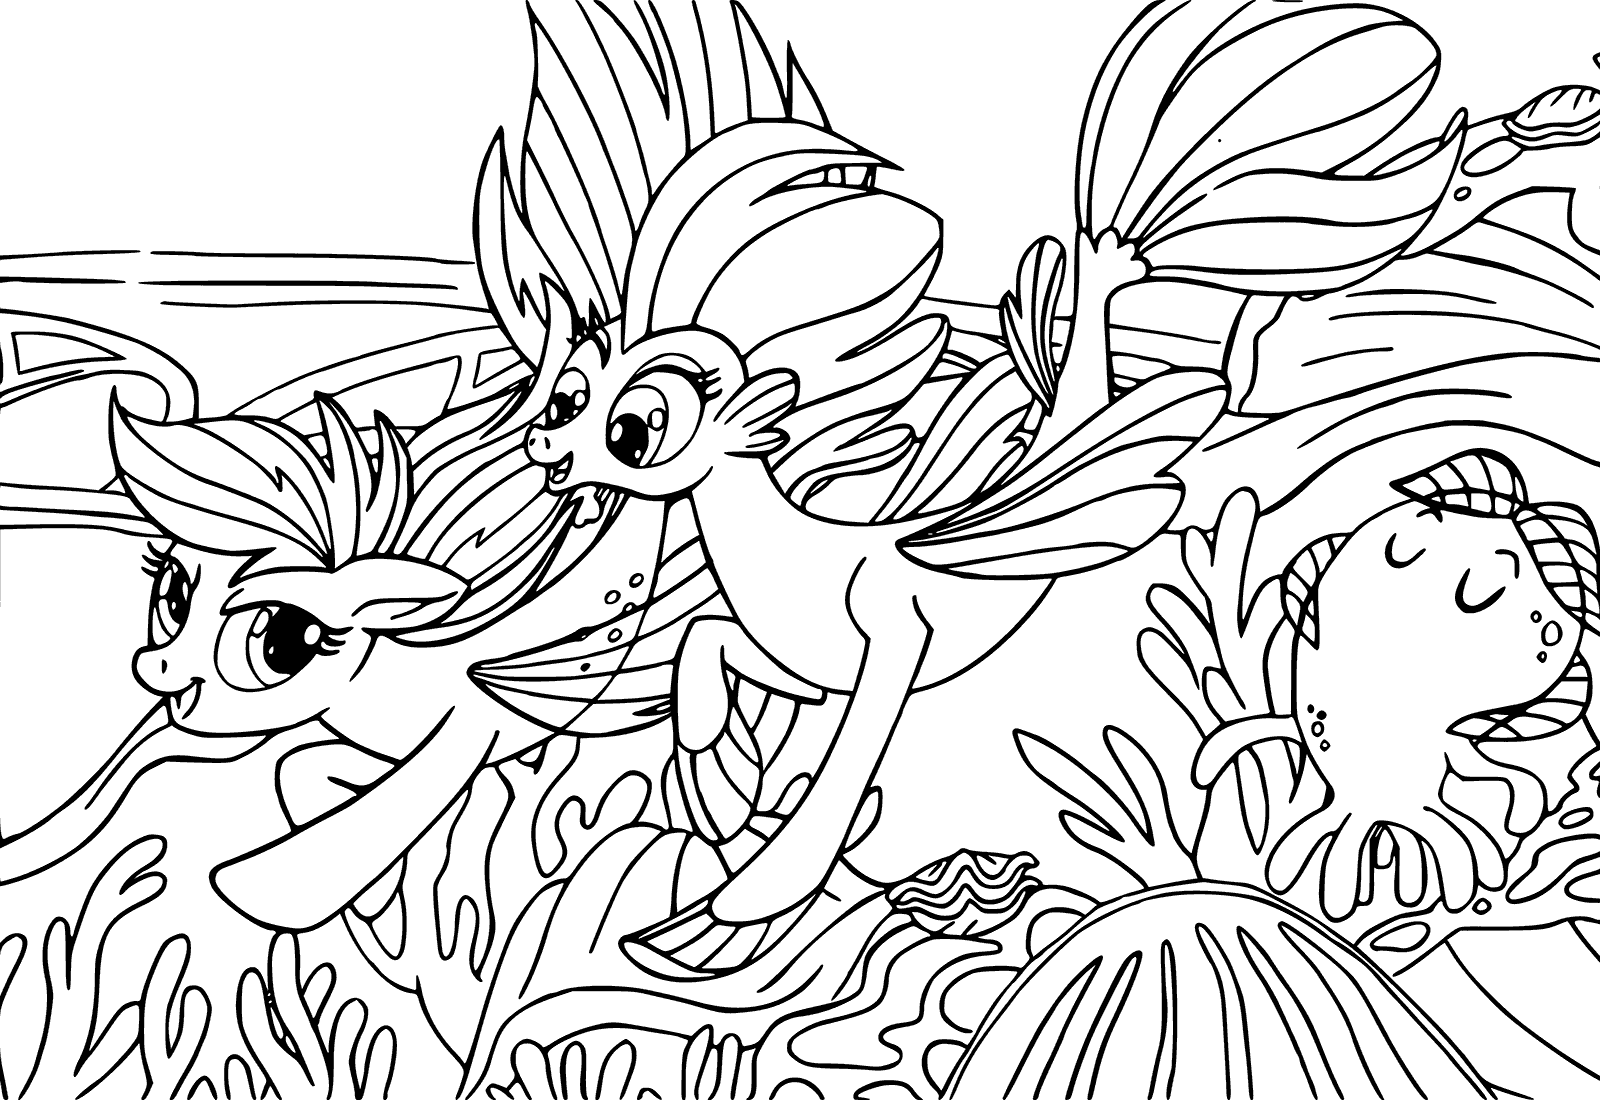 My Little Pony The Movie coloring pages to download and ...